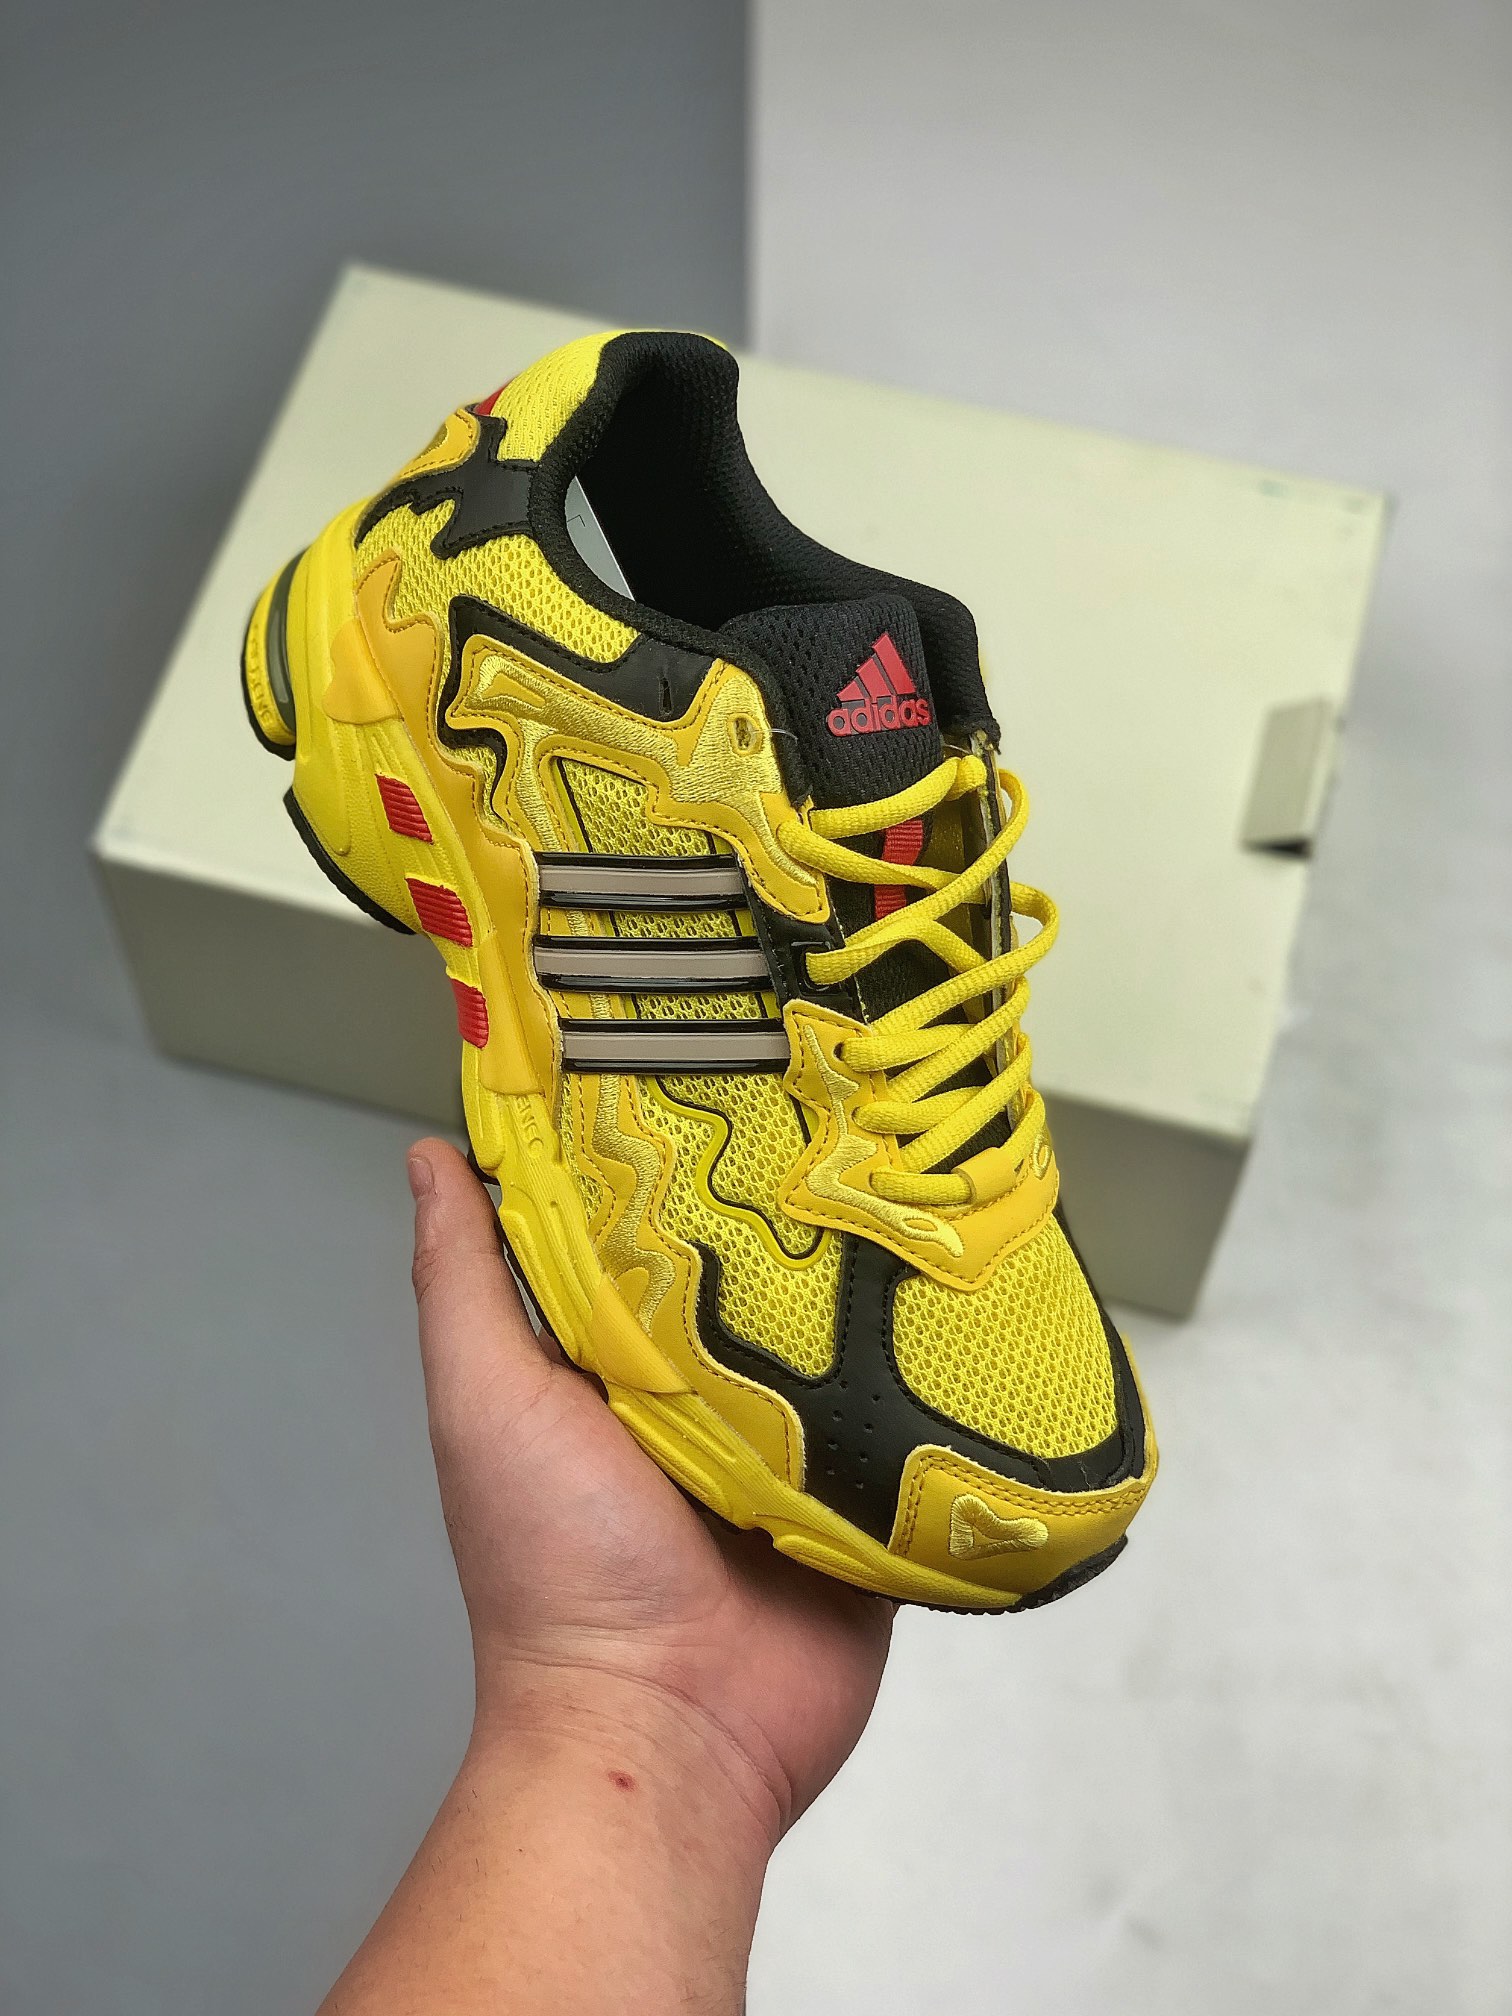 Adidas Bad Bunny x Response CL Yellow GY0101 - Limited Edition Collaboration